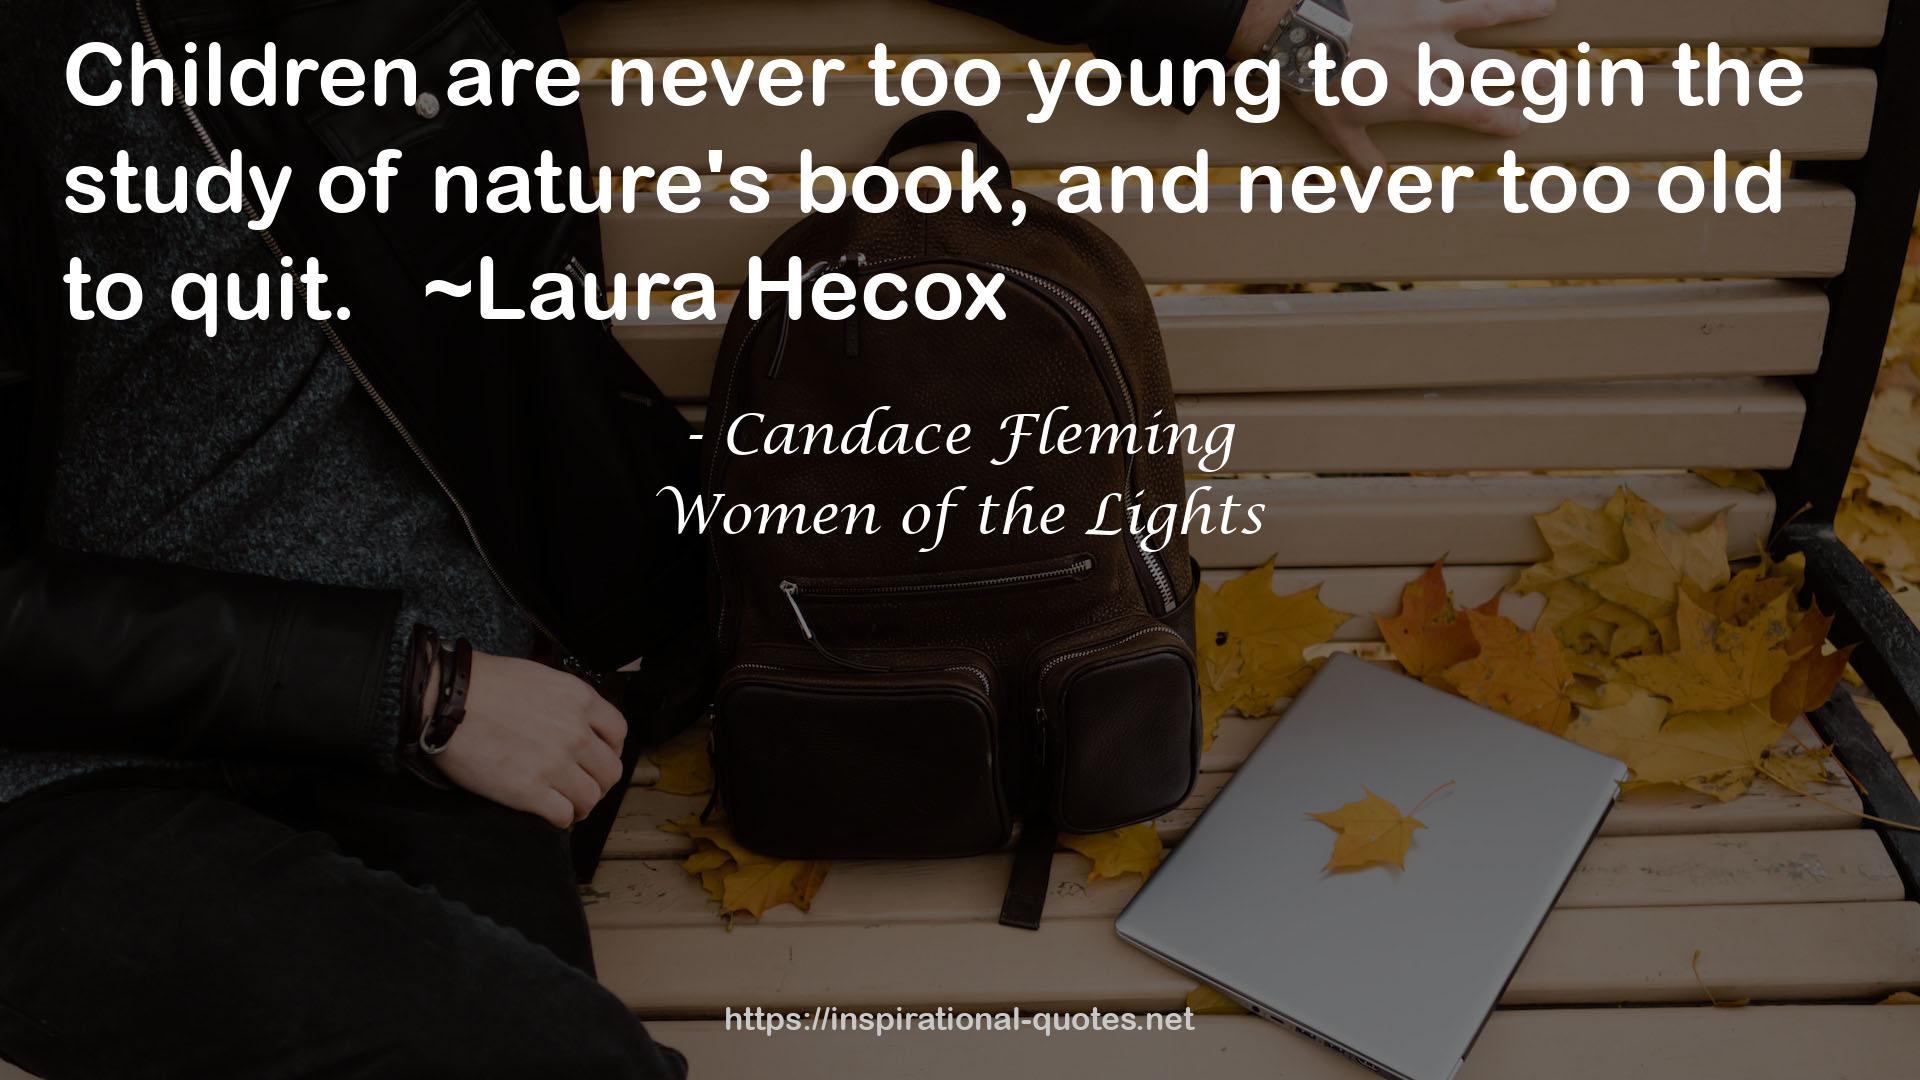 Candace Fleming QUOTES